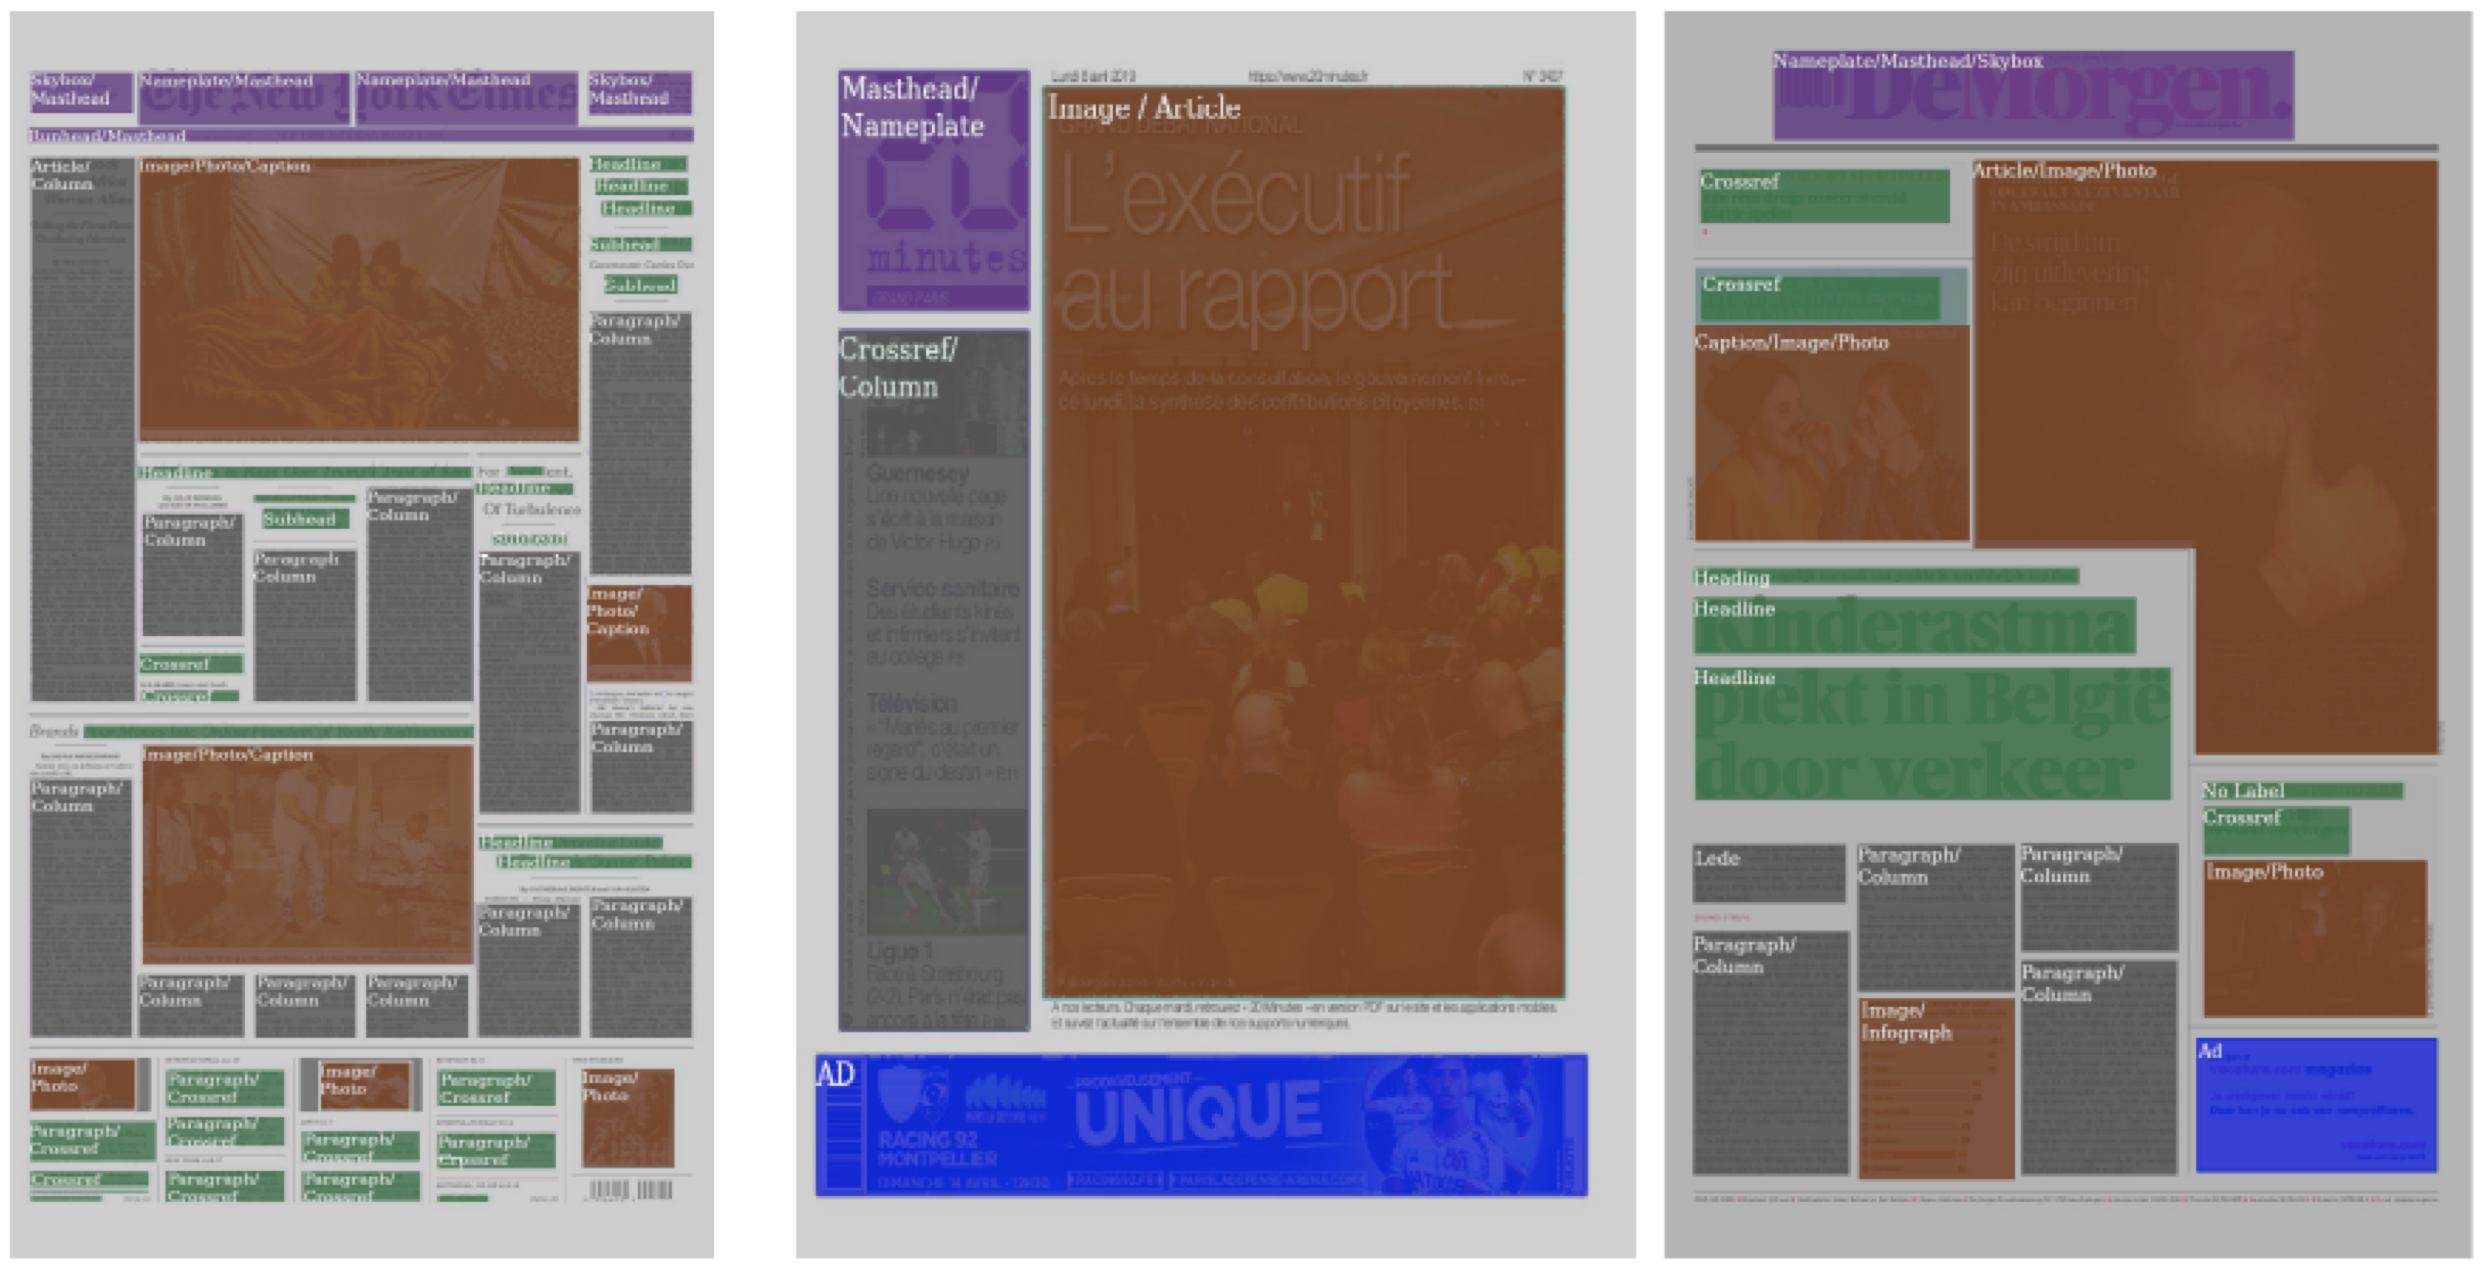 This figure shows the classification results on three different newspapers in our test set. Colors indicate primary categories as masthead elements (purple), text column (gray), ads (blue), images (brown) and minor text elements (green).